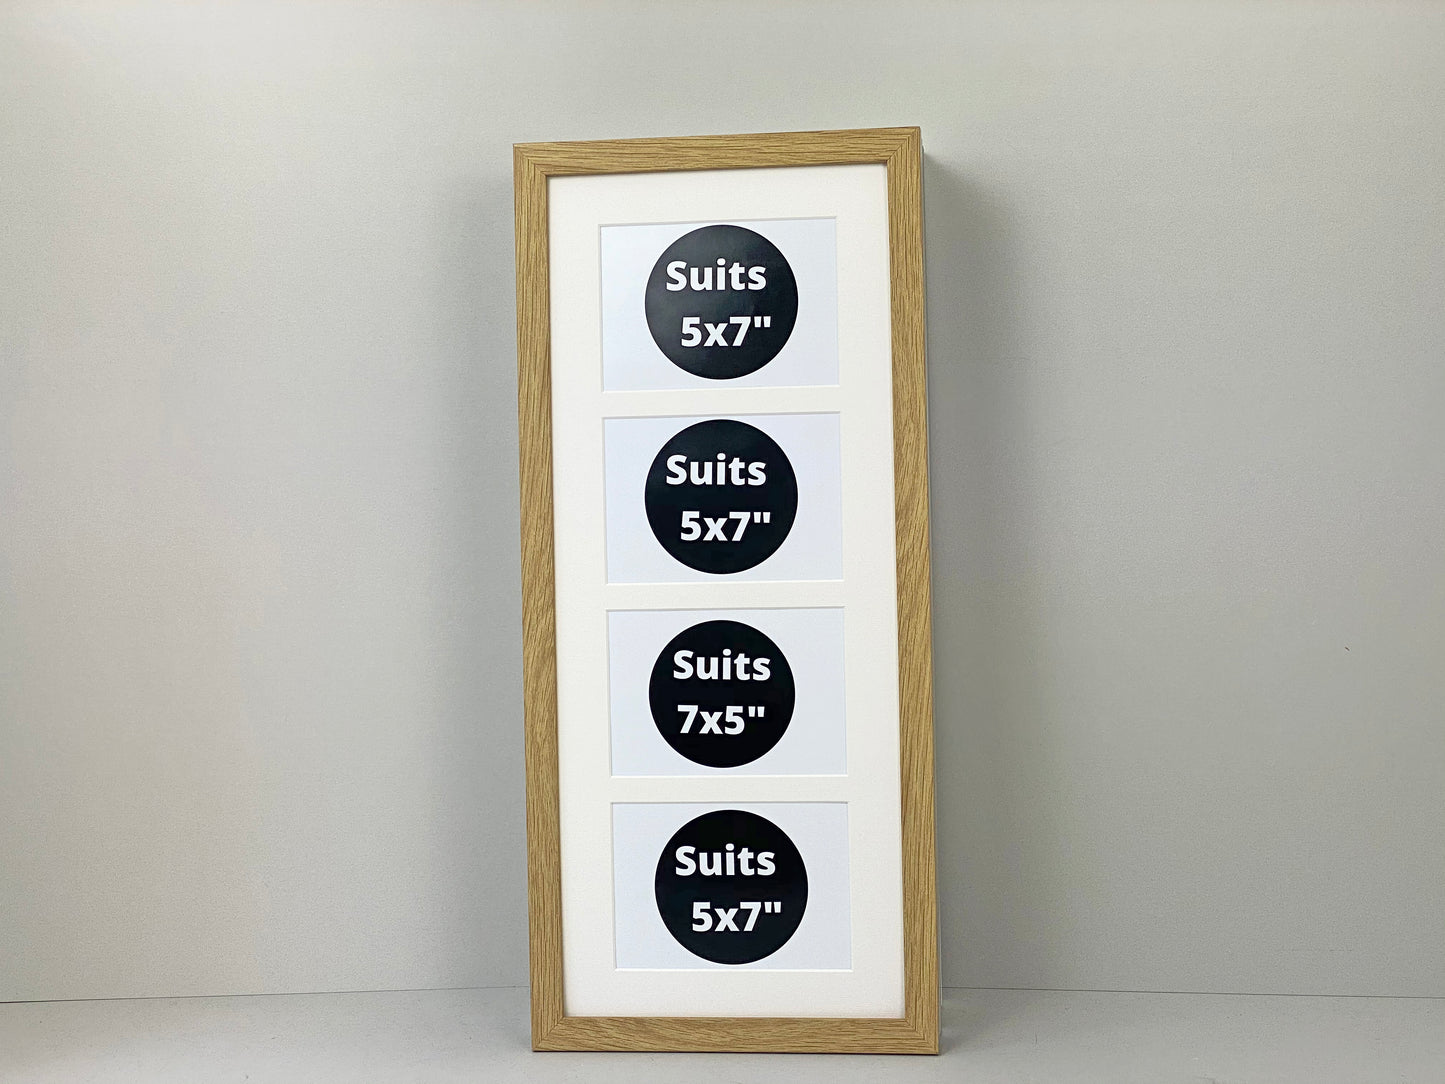 Suits Four 5x7" Photos. 25x60cm. Wooden Collage Picture Frame.